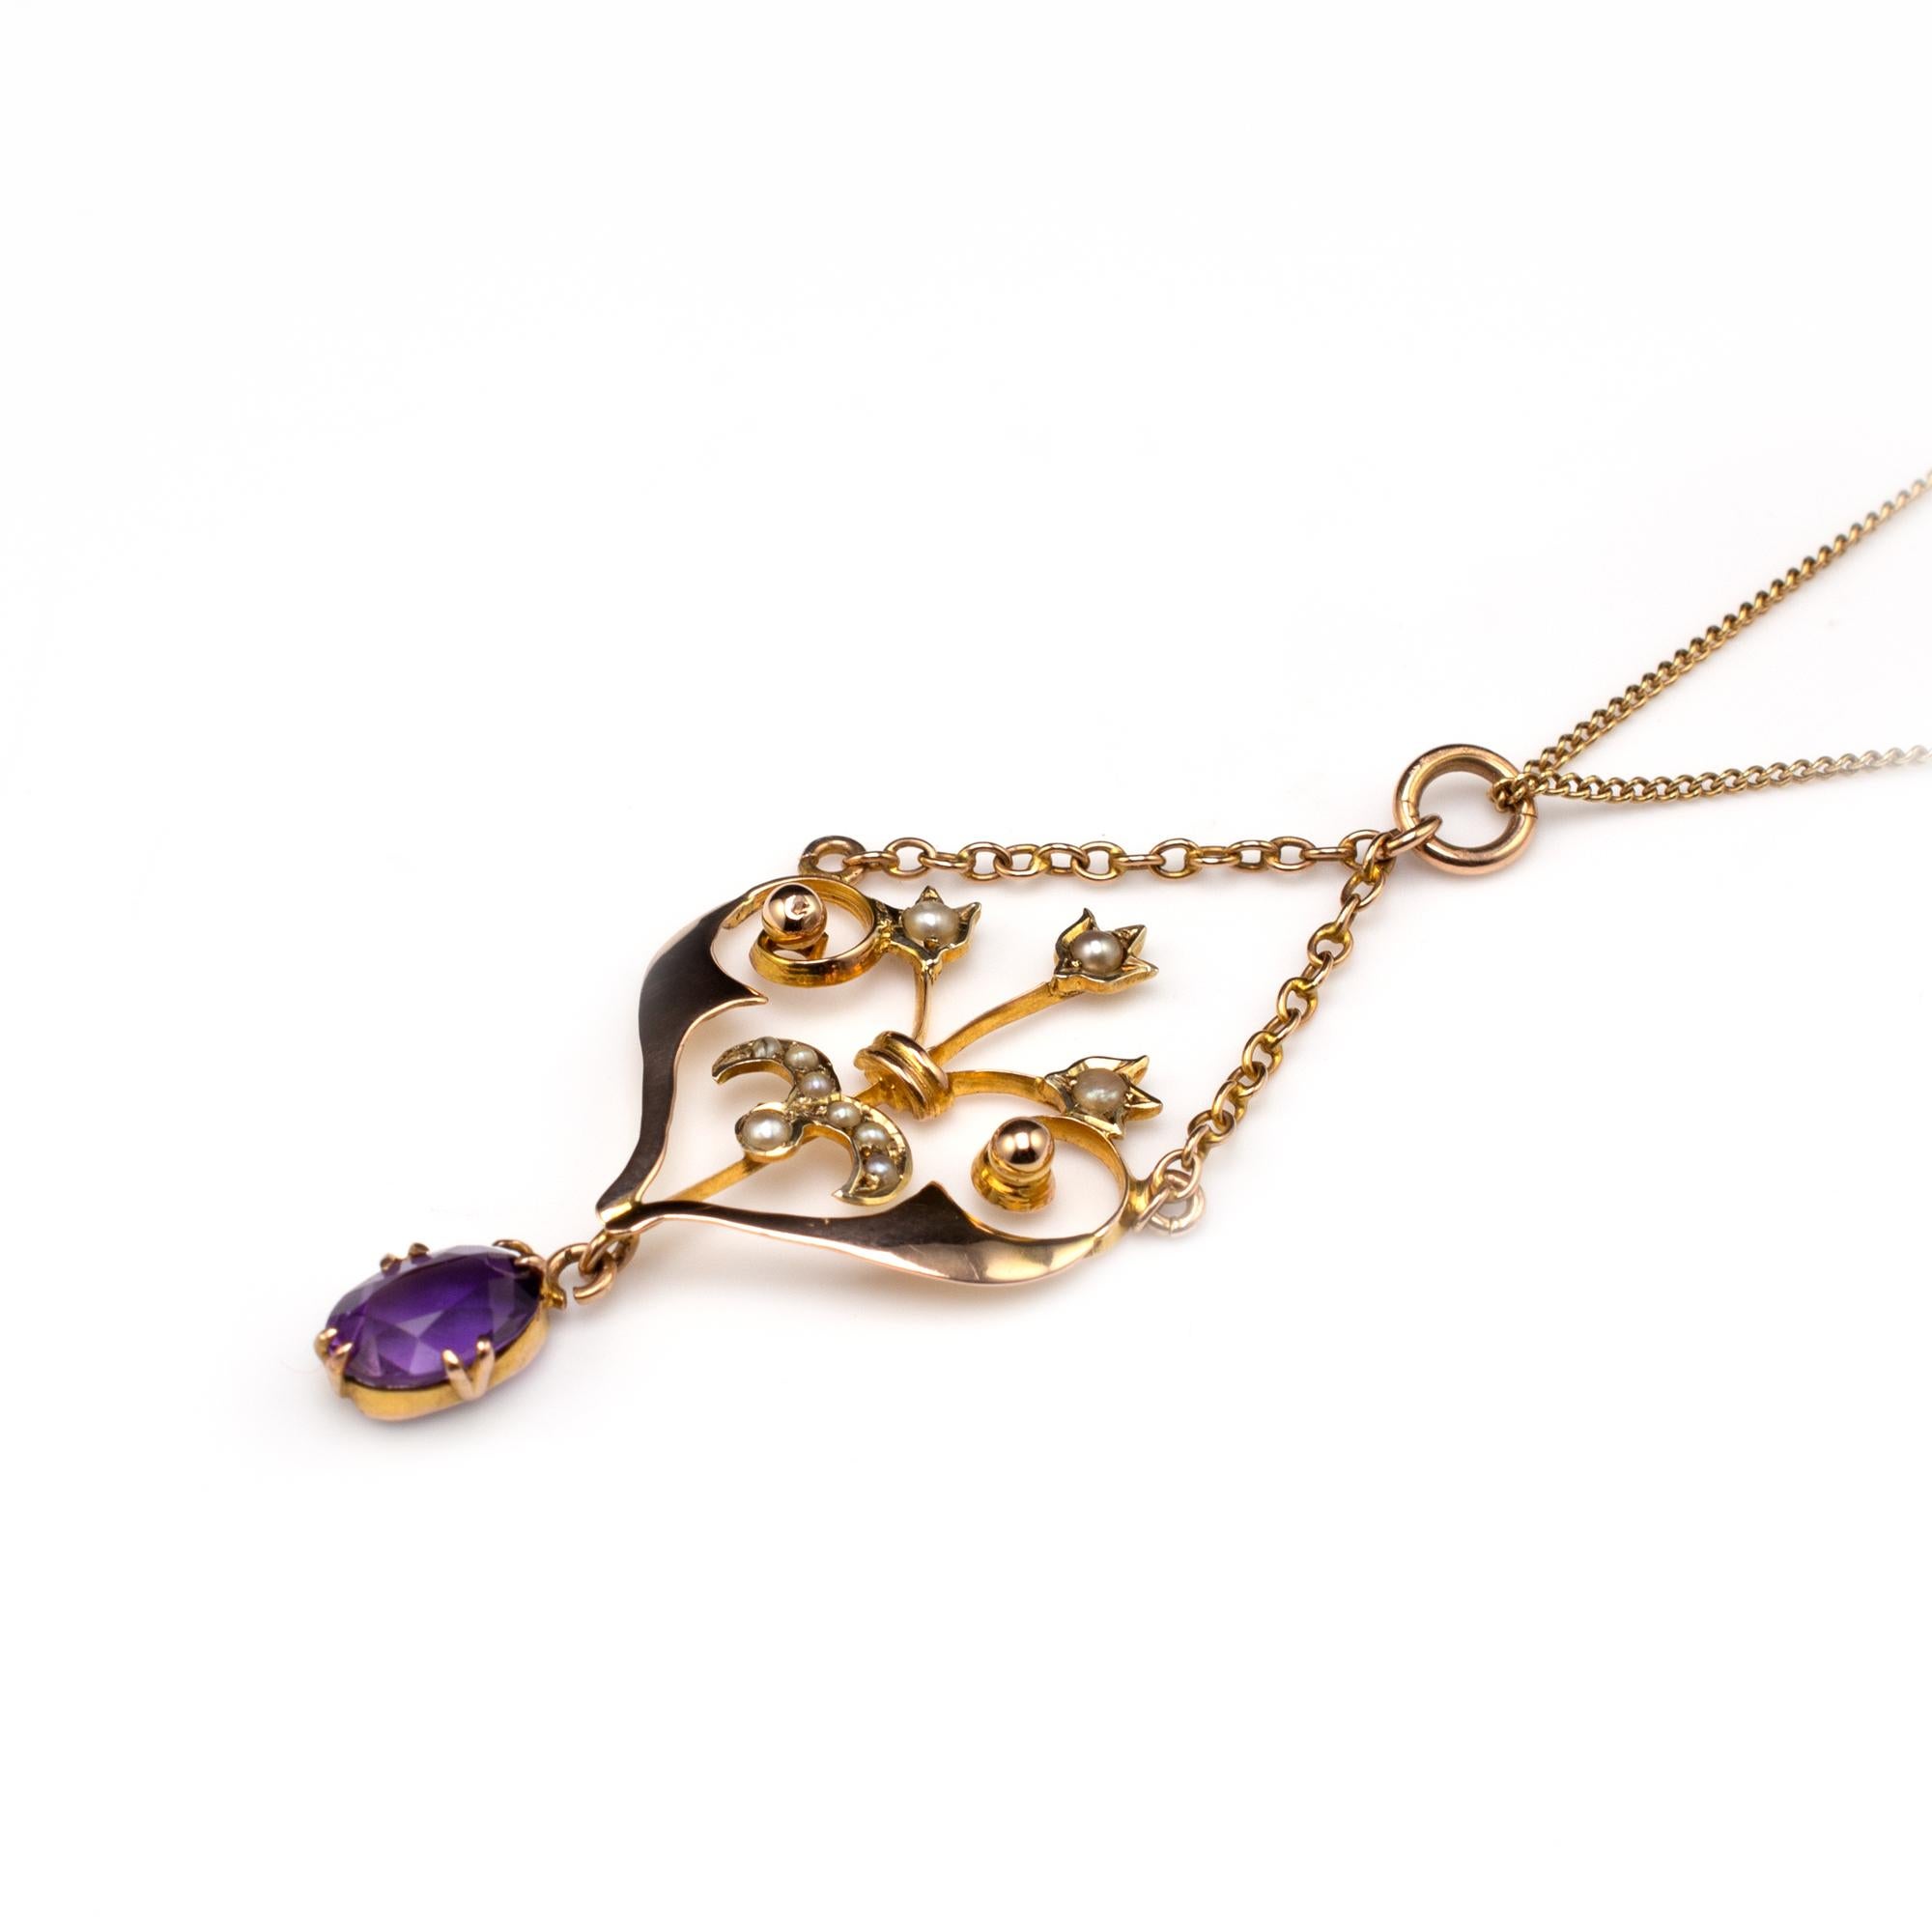 This delightful gold pendant is beautifully decorated with amethyst and pearls and dates back to the early 20th century.

The heart-shaped gold frame is beautifully crafted with graduating scrolls and ball decoration. The central display of tulips